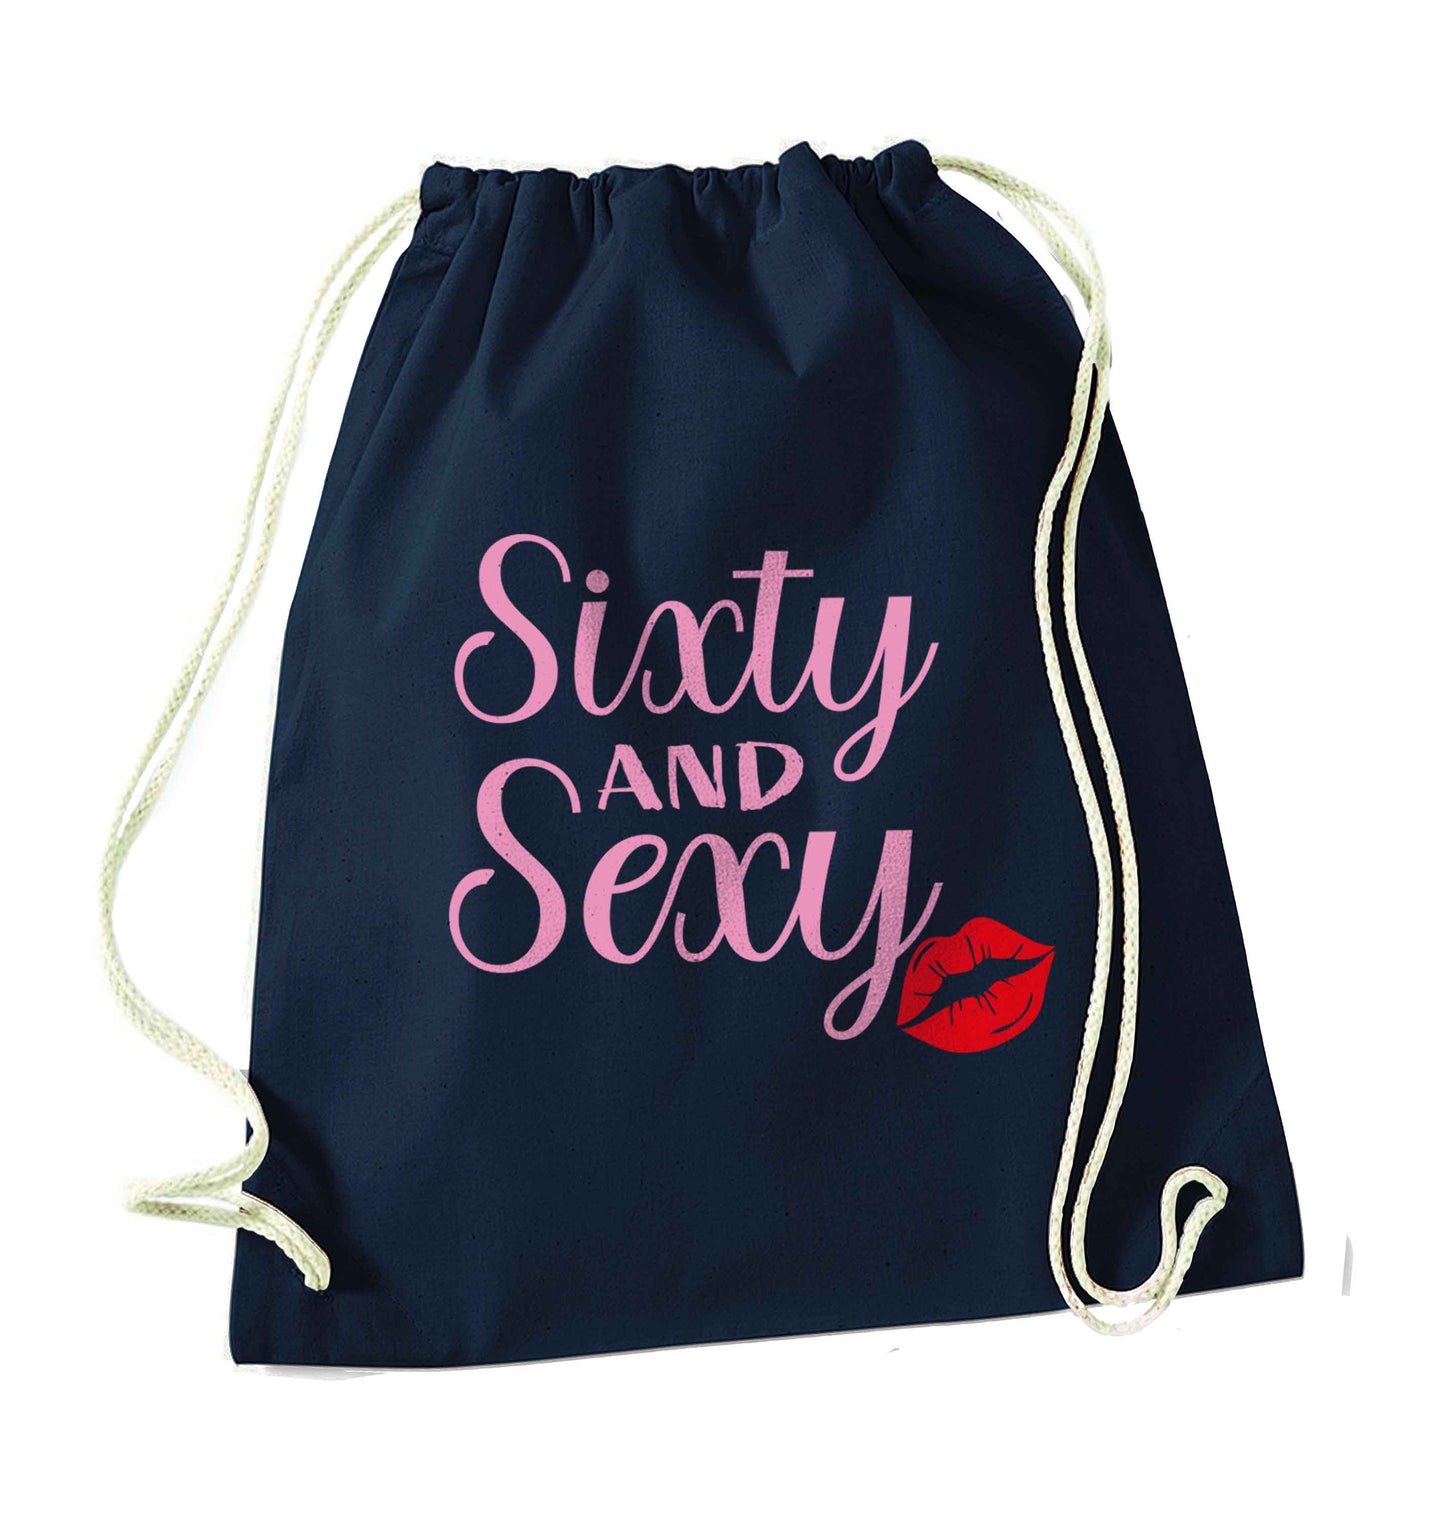 Sixty and sexy navy drawstring bag